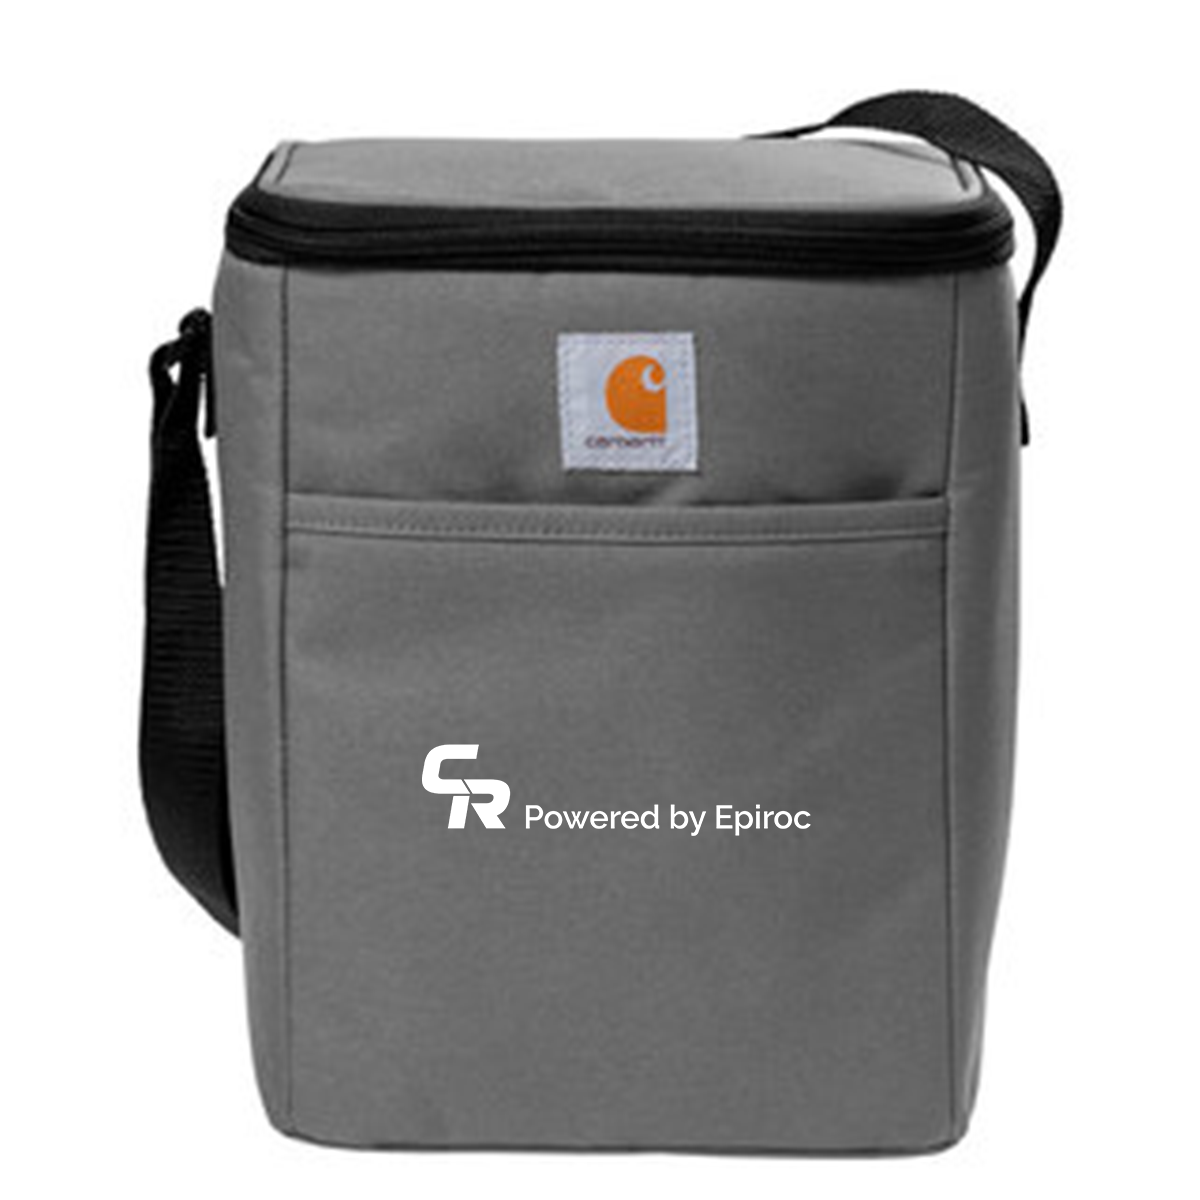 Carhartt 12-Can Cooler Grey [CR Powered by Epiroc]